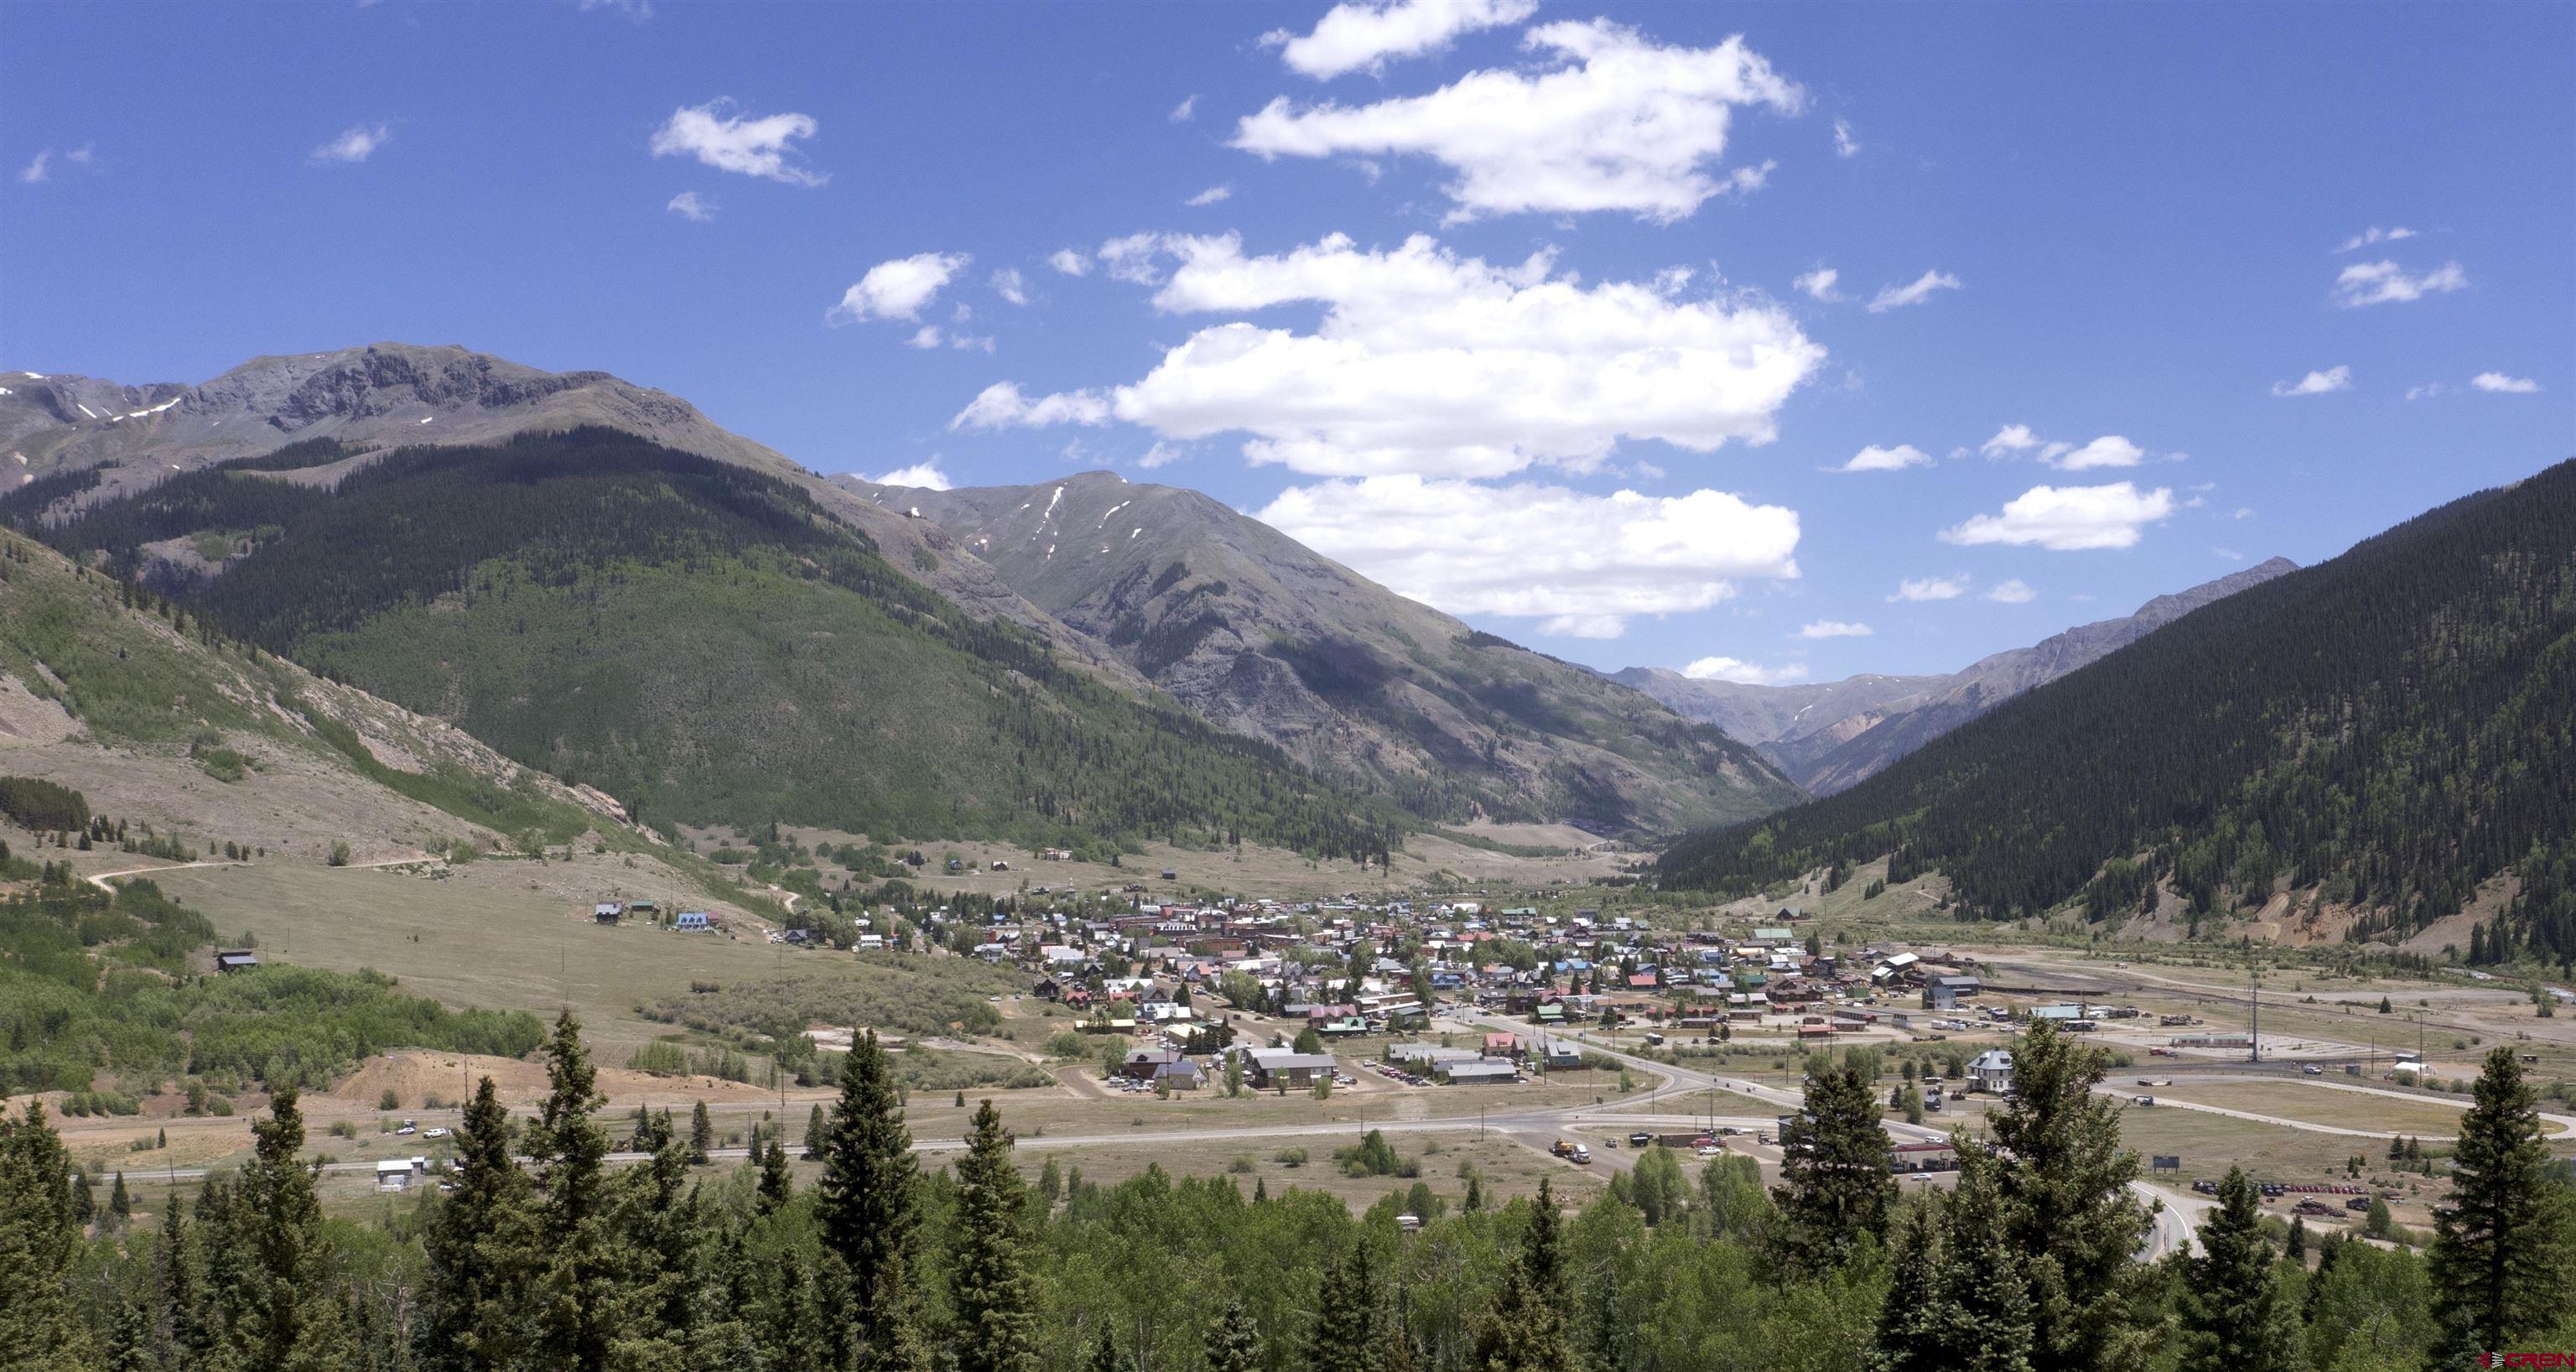 Photo of Tbd 5th & Snowden St in Silverton, CO